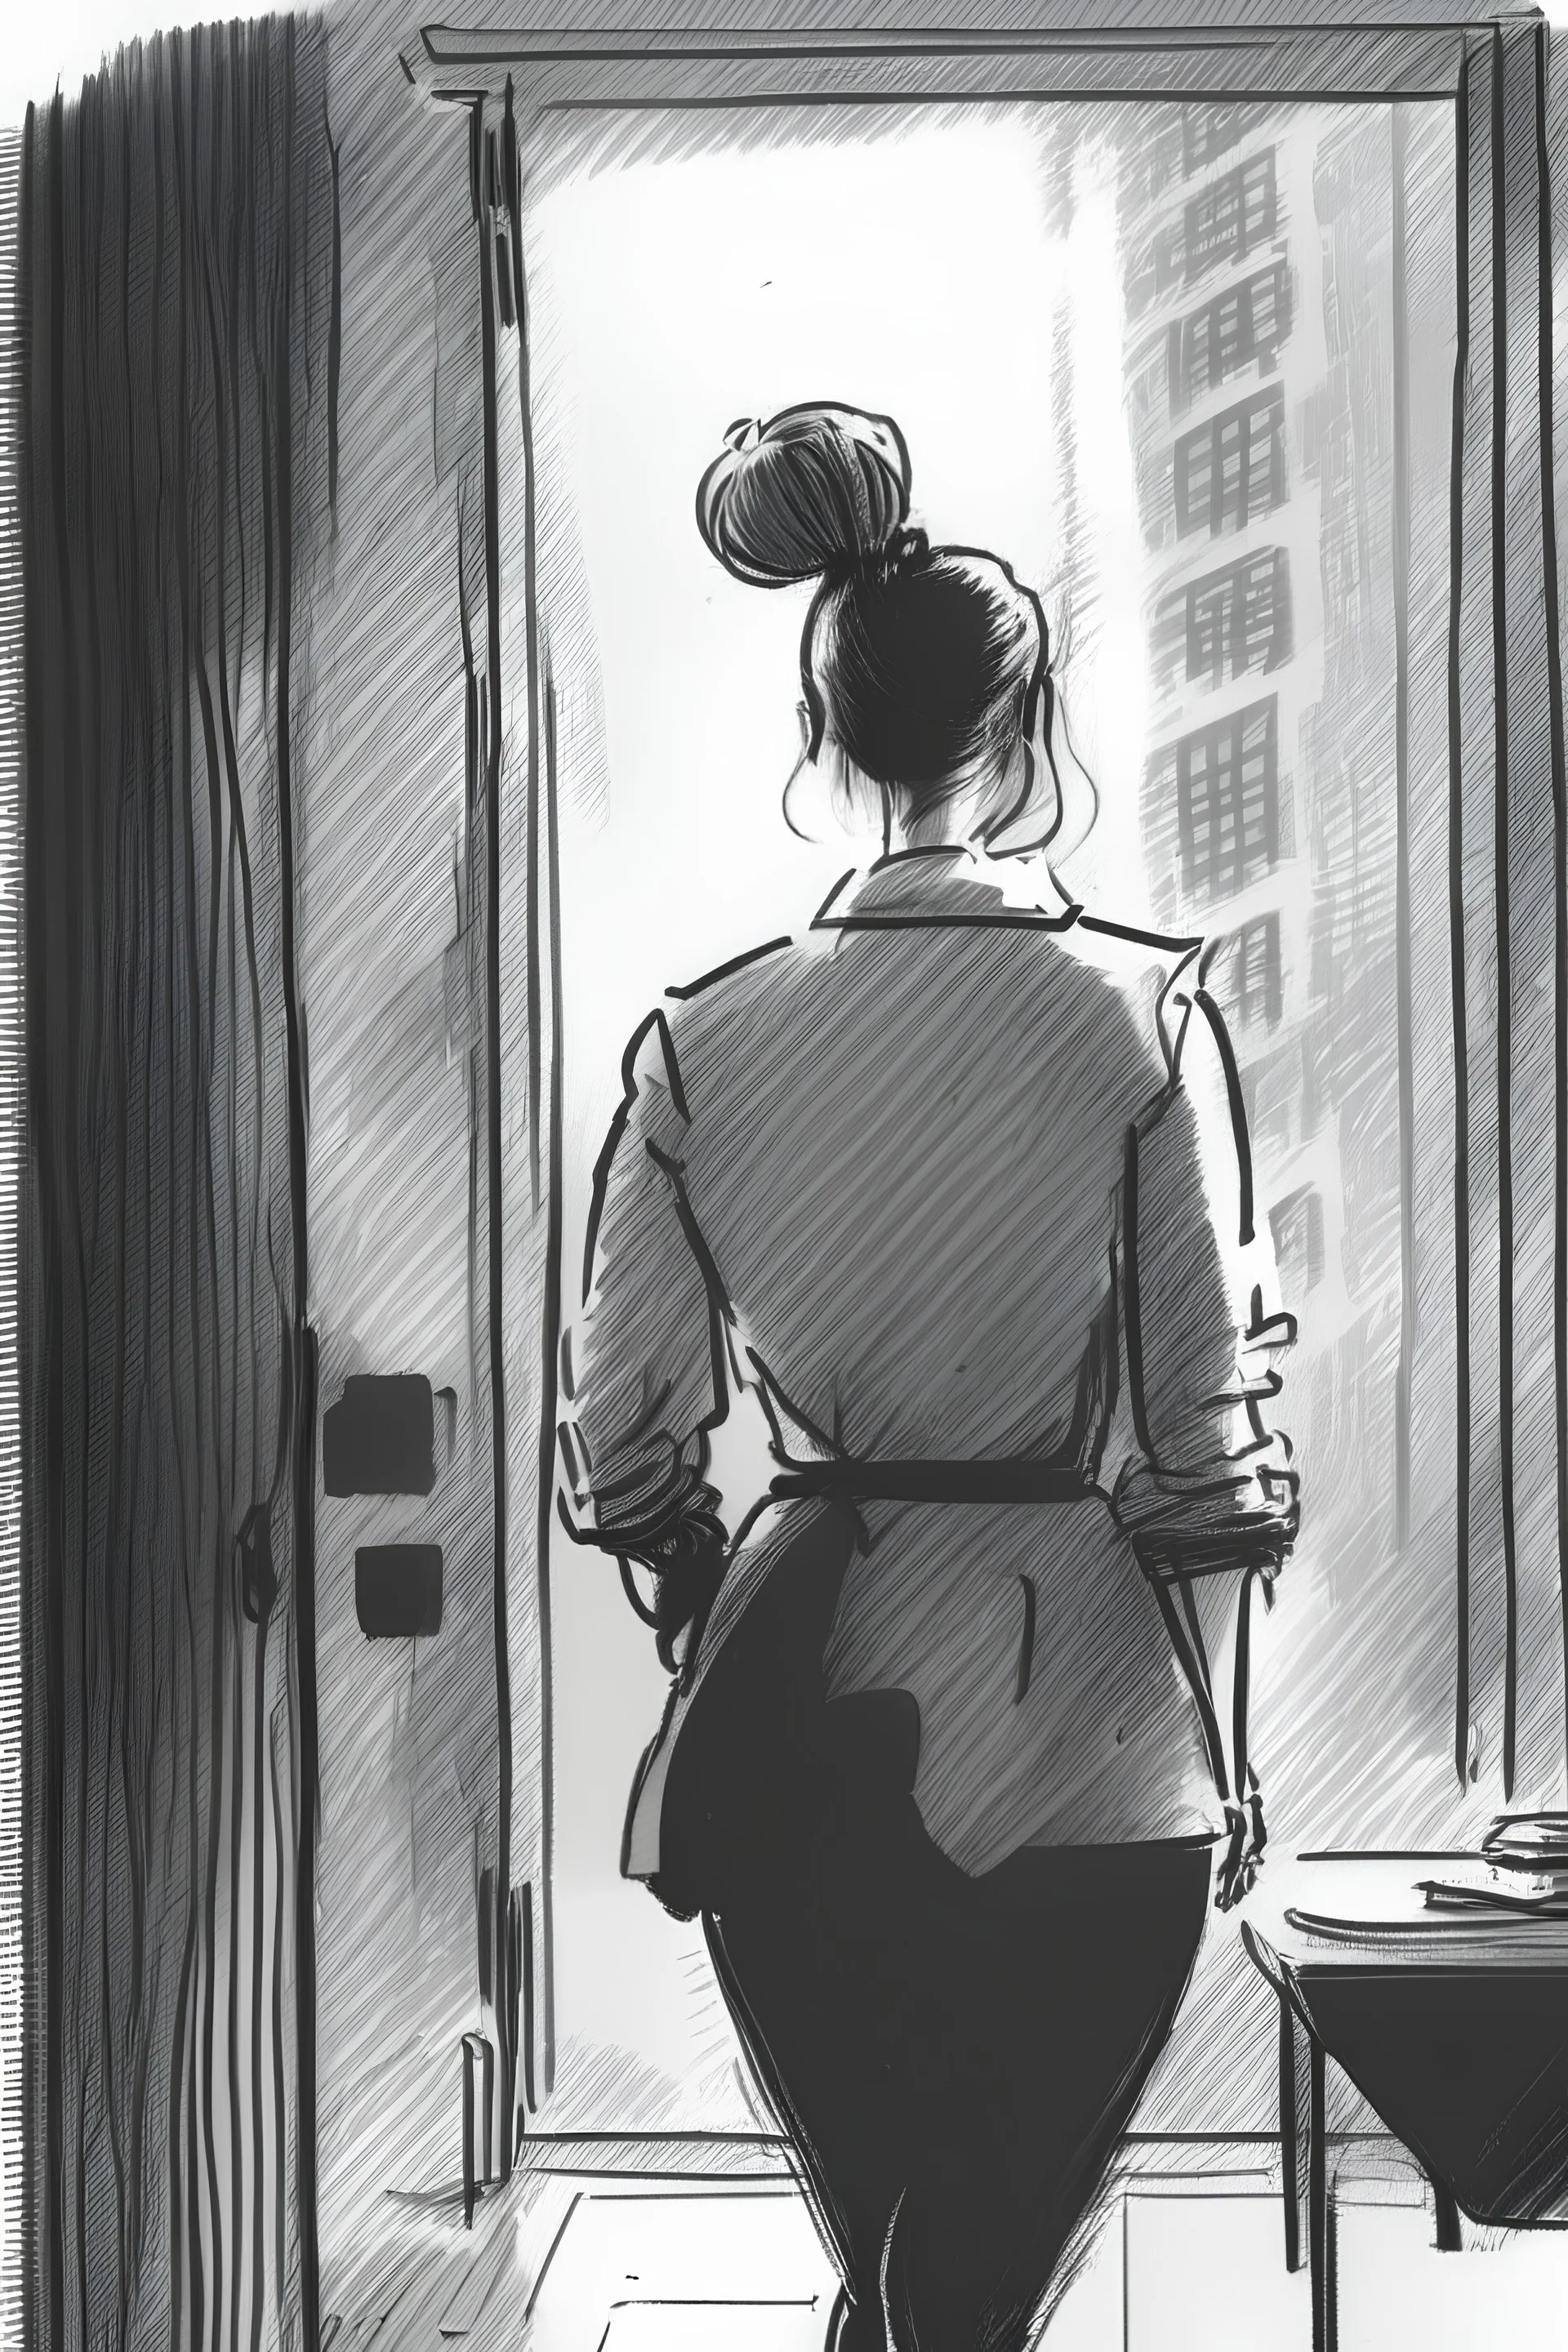 woman with a bun walking away out of someone's office with big windows sketch style